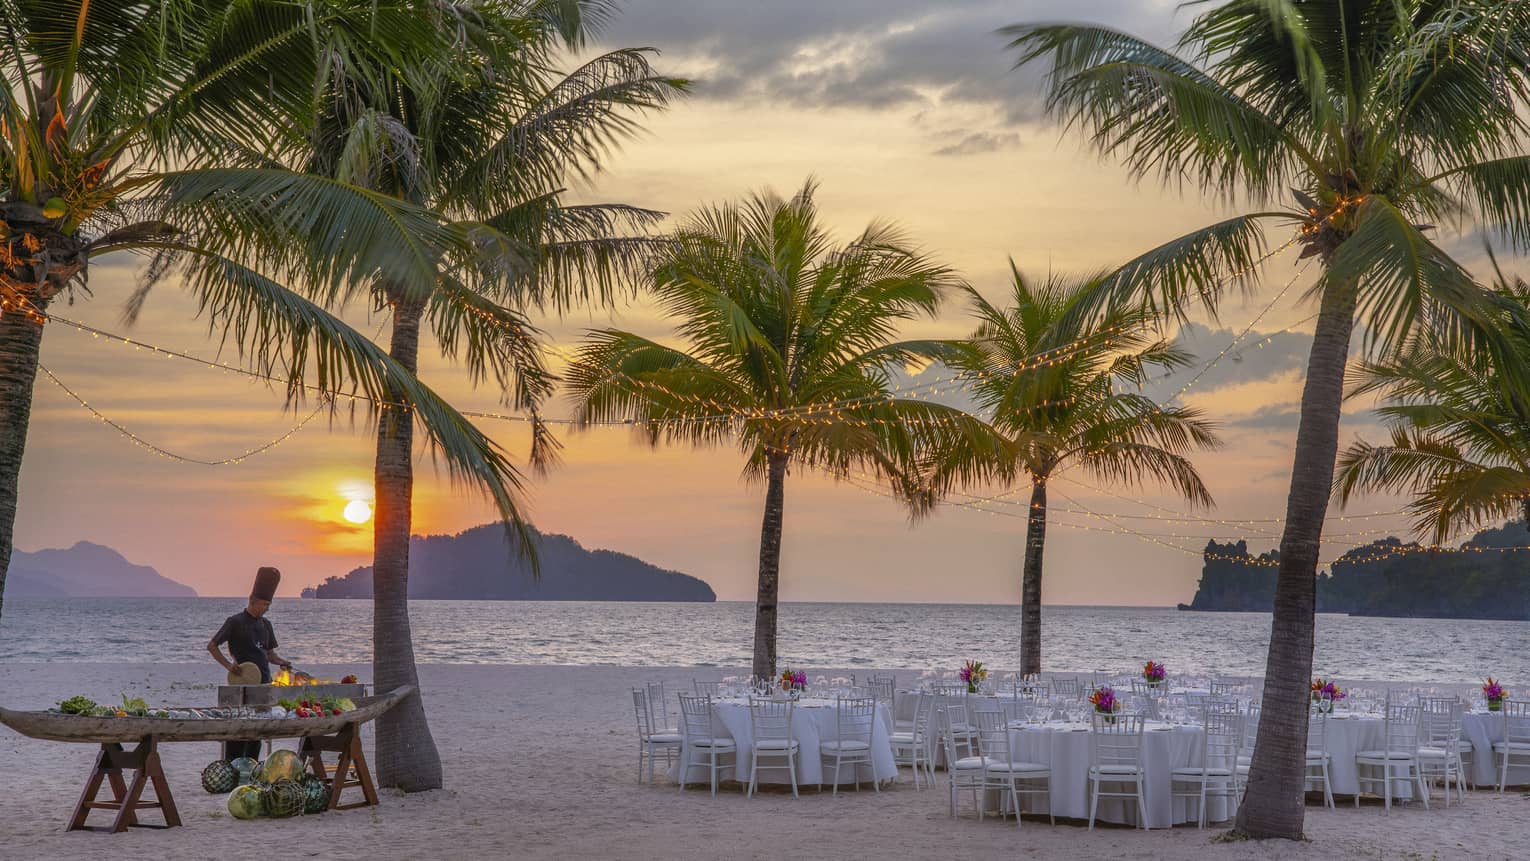 Tables set for dinner on the beach under a canopy of palm trees, a chef cooking over an open flame against the setting sun.